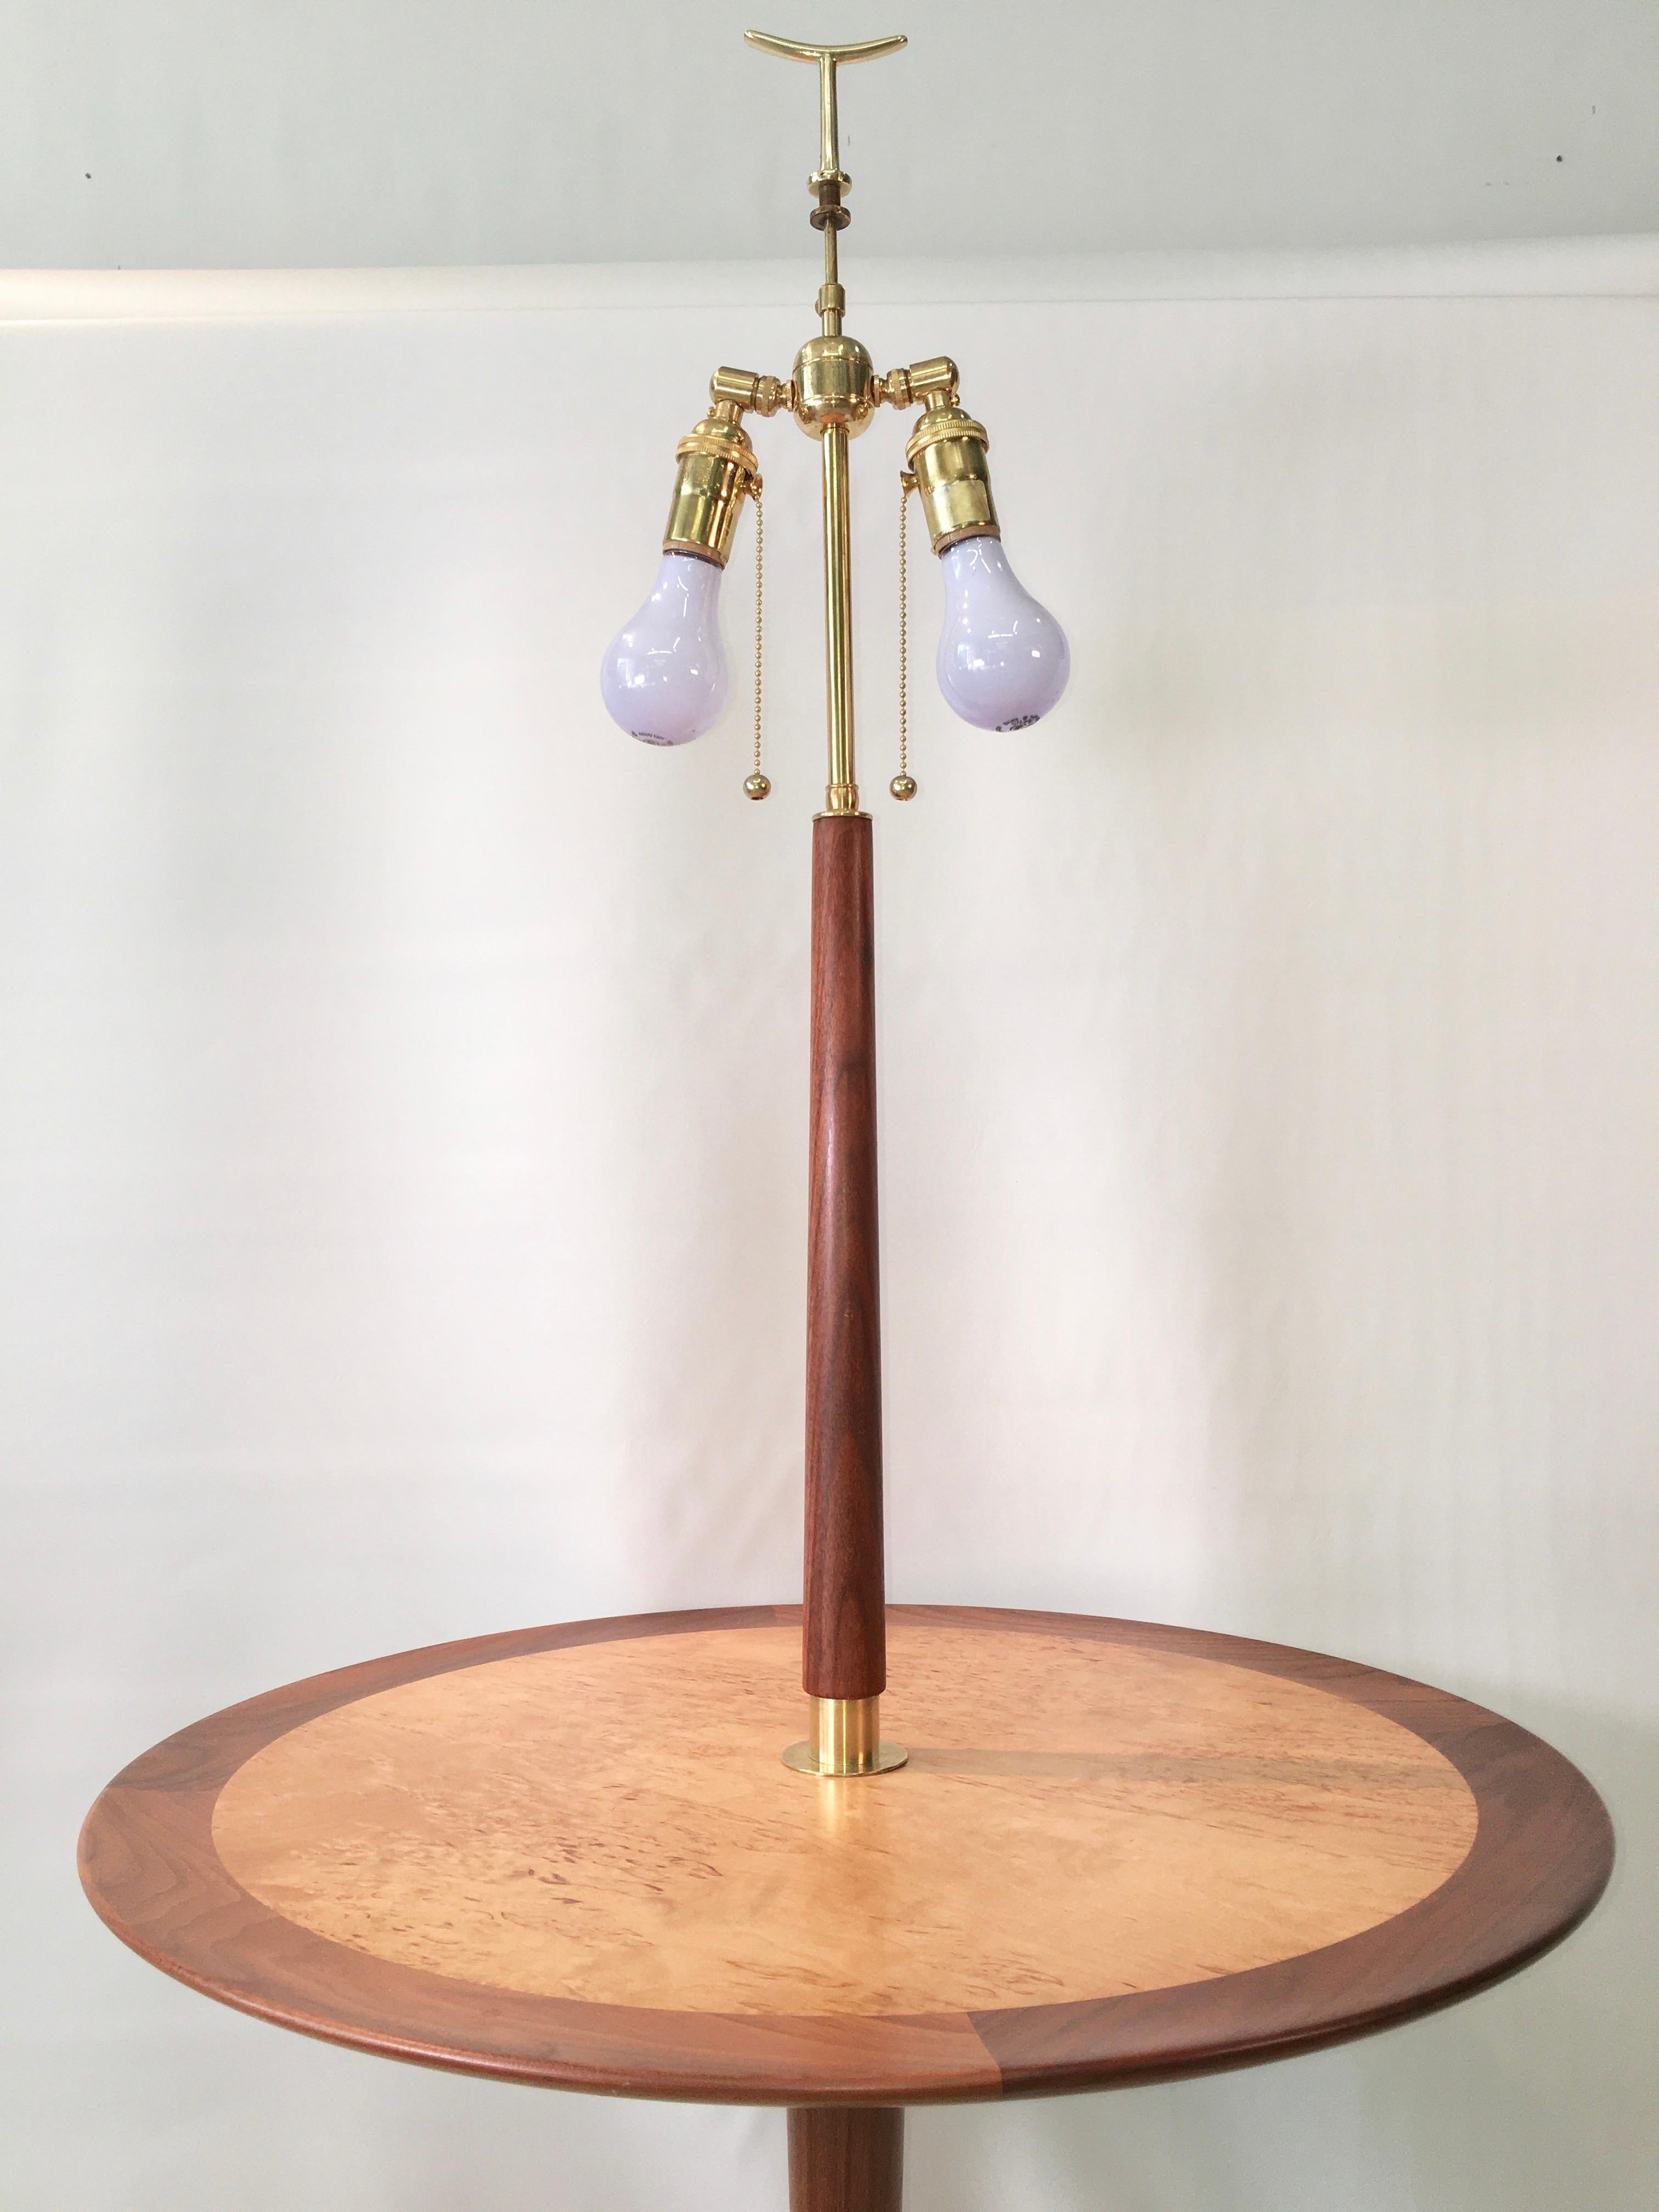 Dunbar Snack Table Floor Lamp, Model 4856, Designed by Edward Wormley In Good Condition For Sale In Hanover, MA